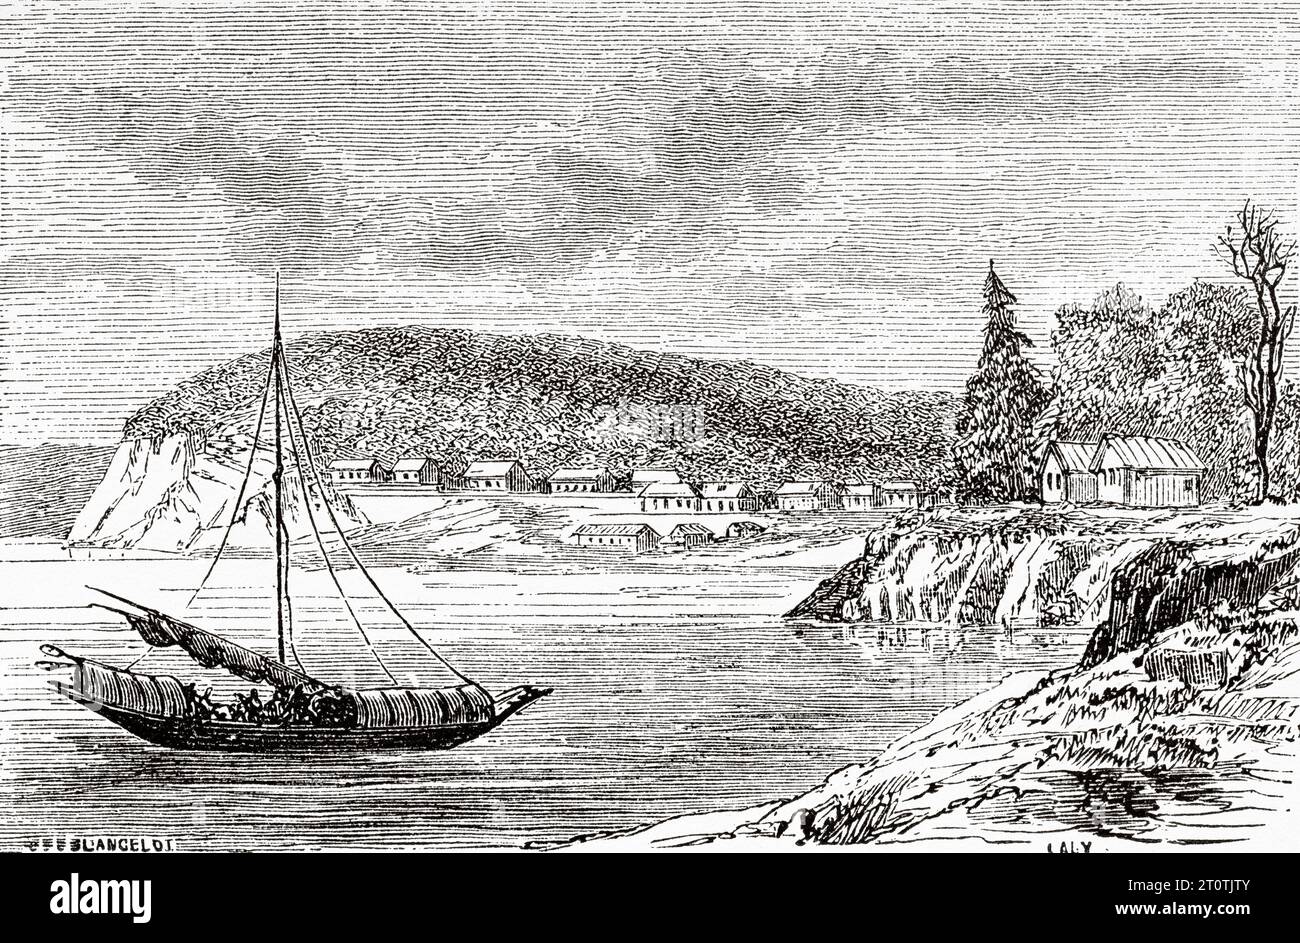 View of Alexandrovsk, strait of Tartary. Russia. Old 19th century engraving from Le Tour du Monde 1860 Stock Photo